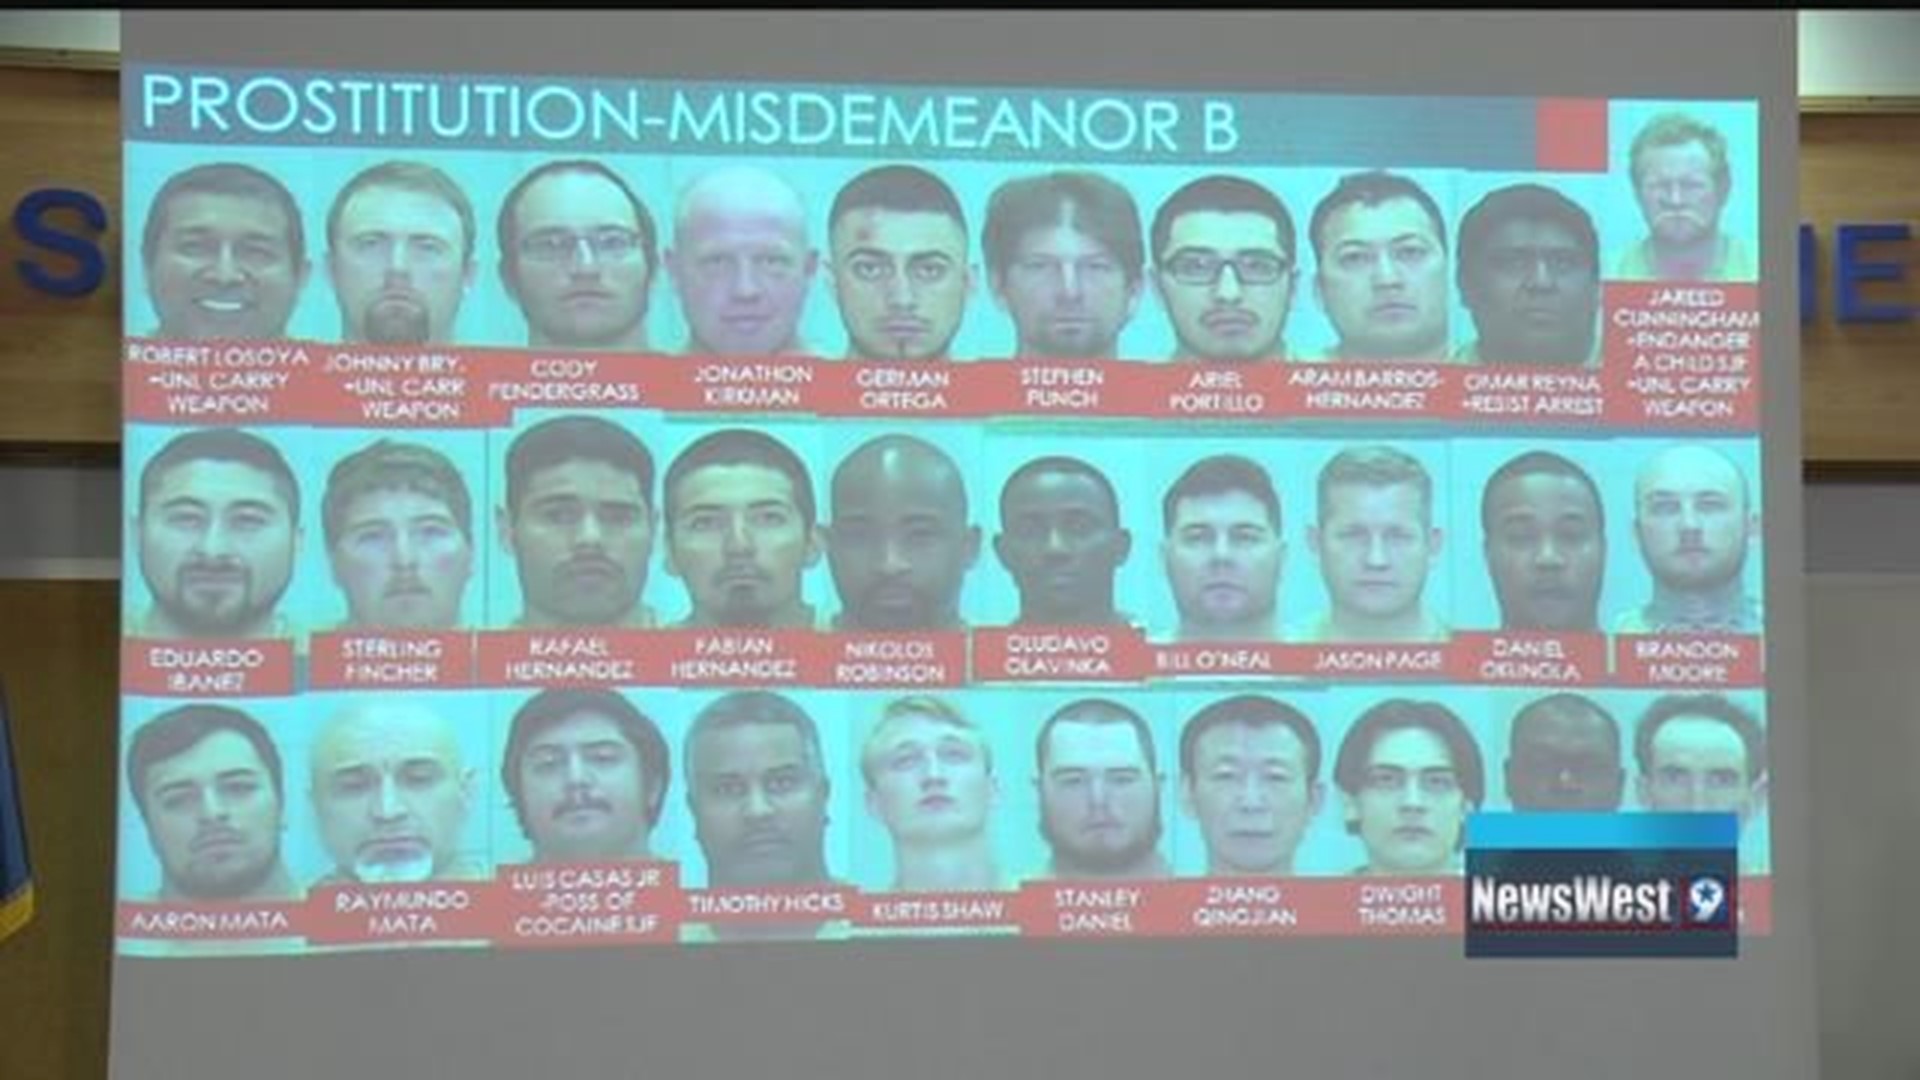 62 arrested during 15-day sting operation involving 11 agencies